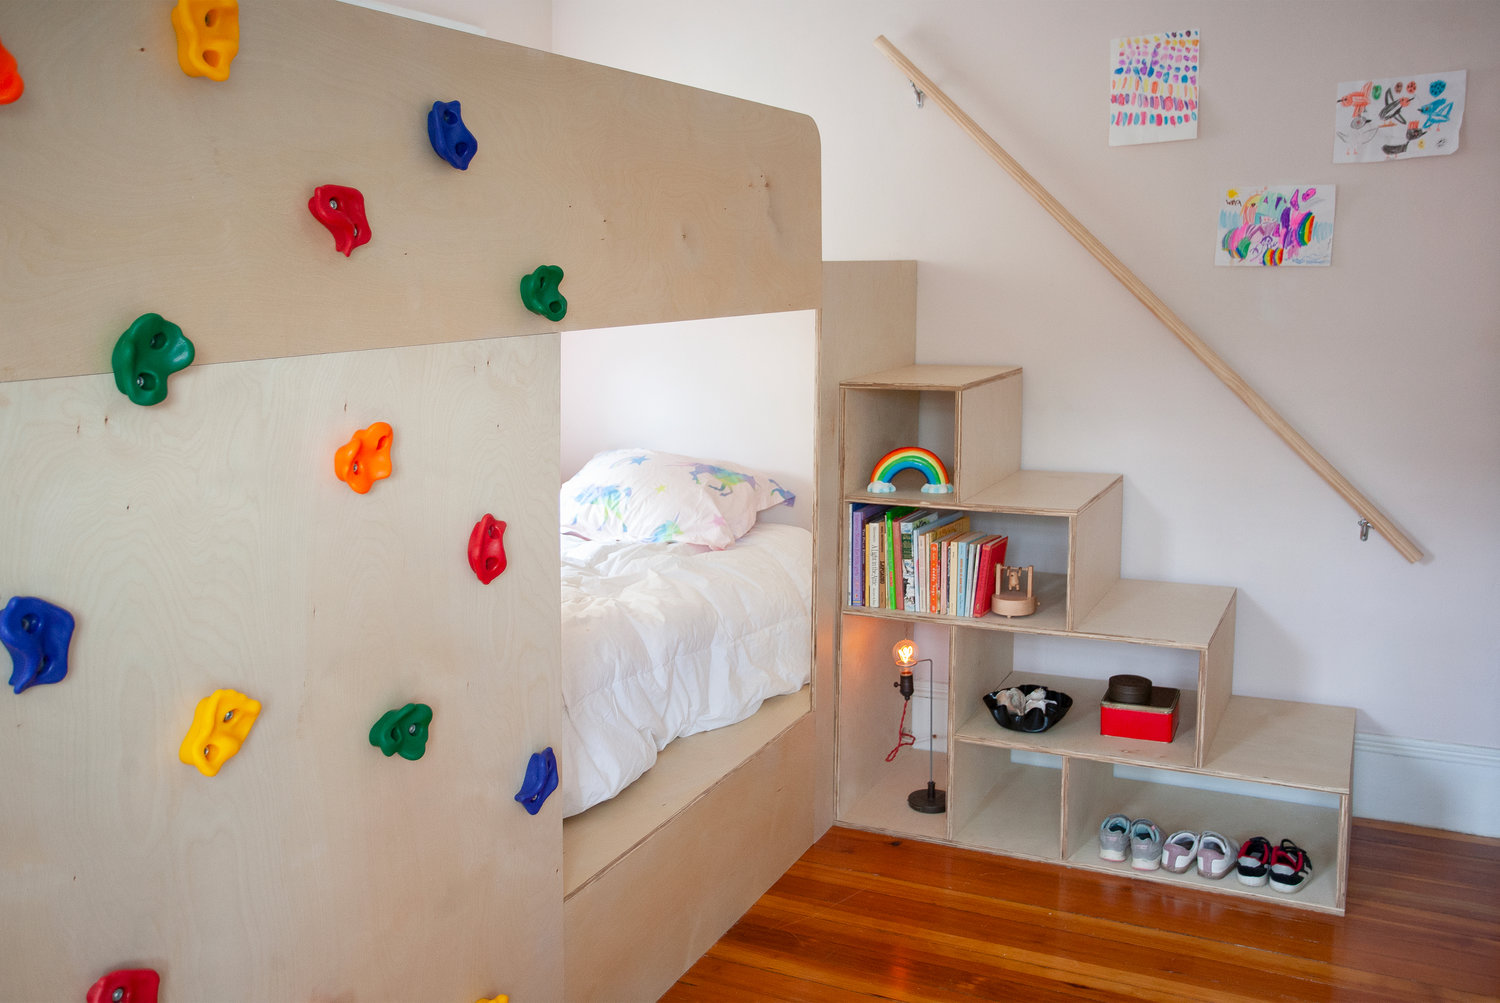 A climbing wall steps in for a ladder and makes space for storage